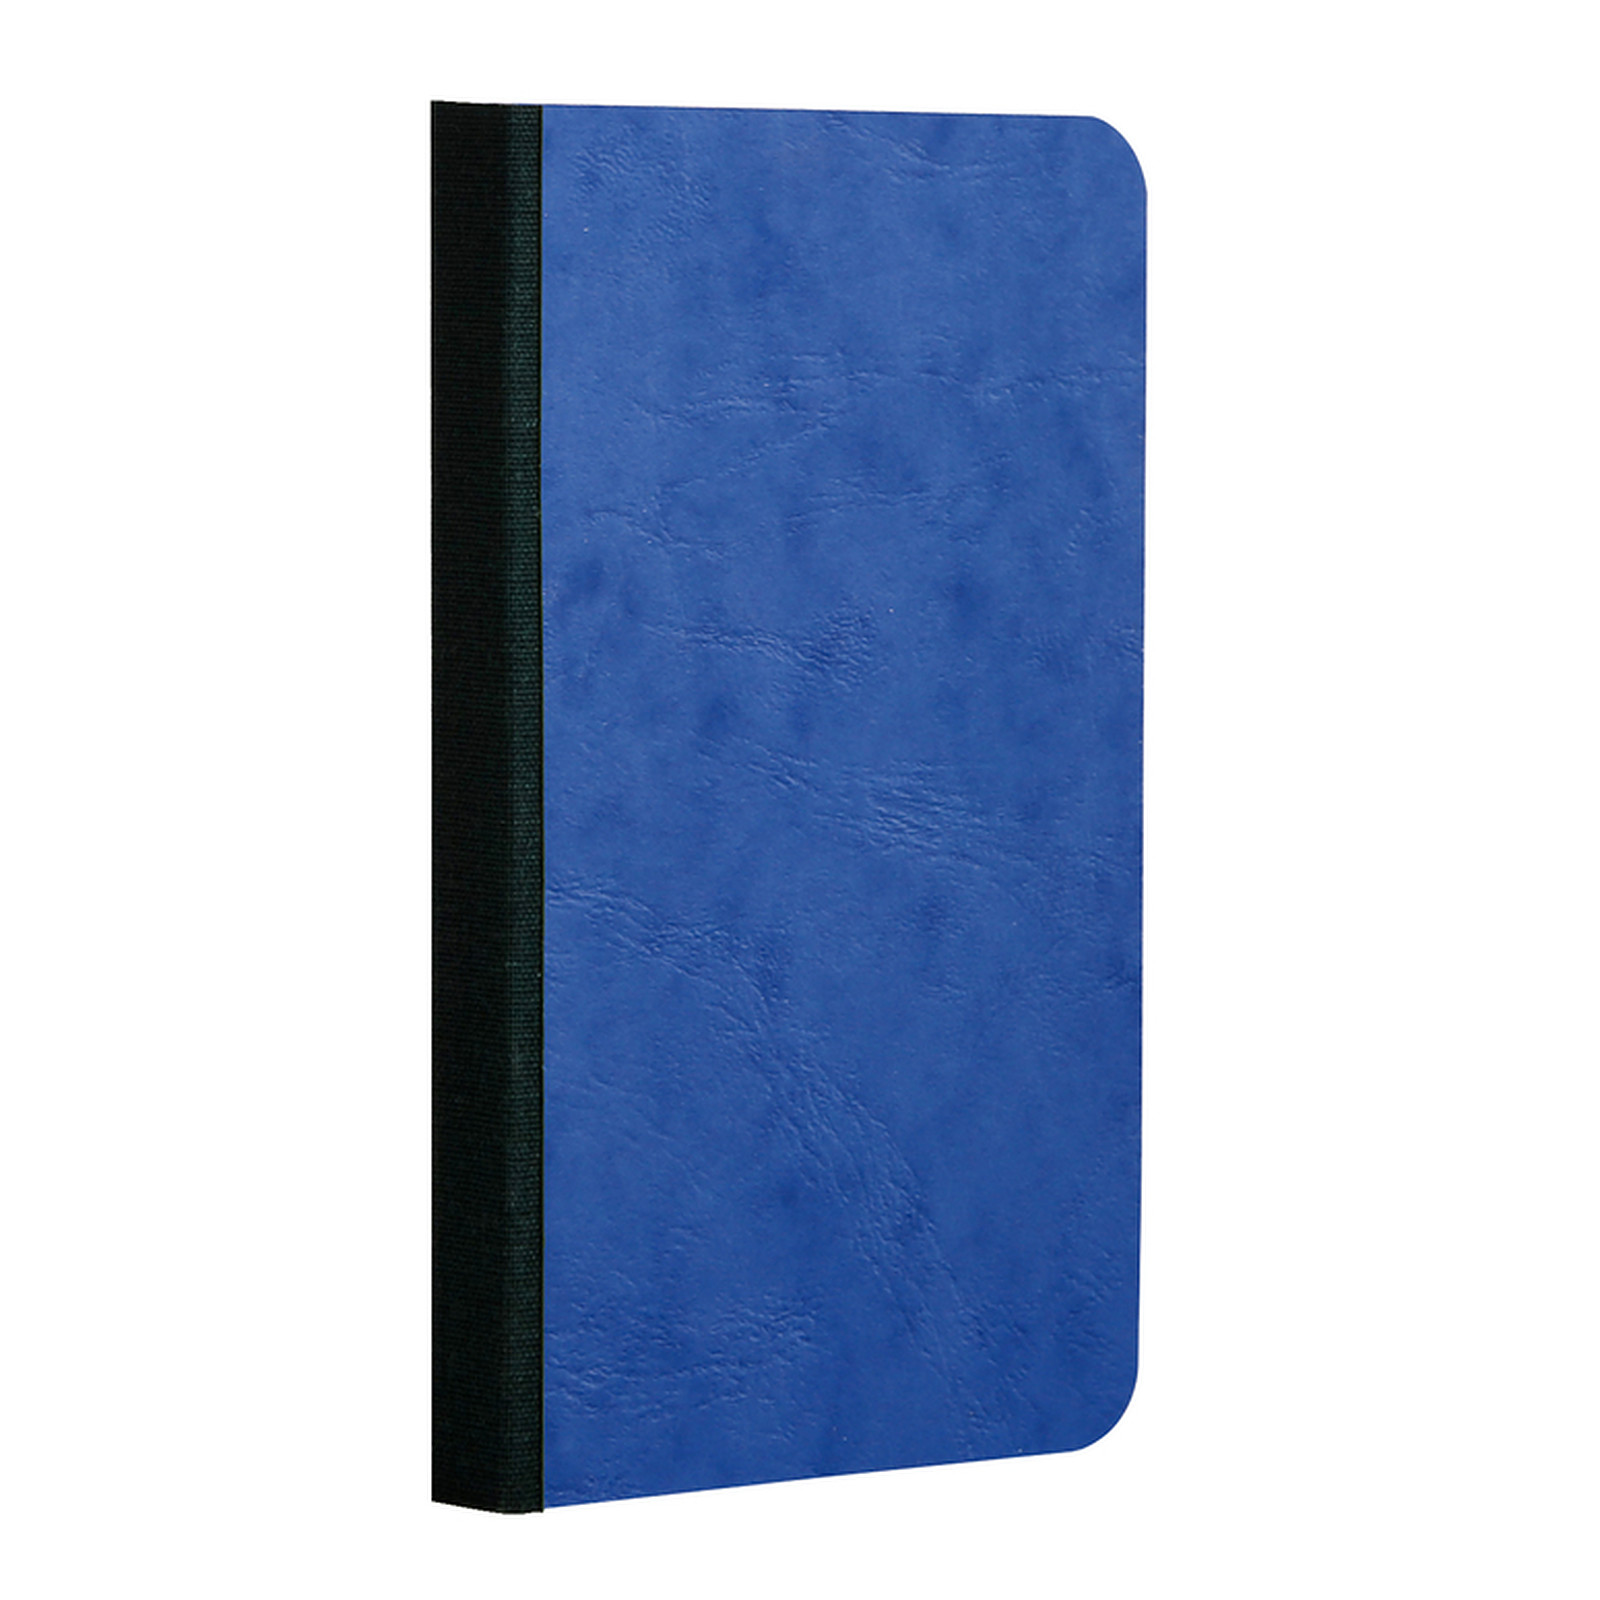 Clairefontaine carnet broche 9x14 192 pages 5x5 bleu - Carnet Clairefontaine